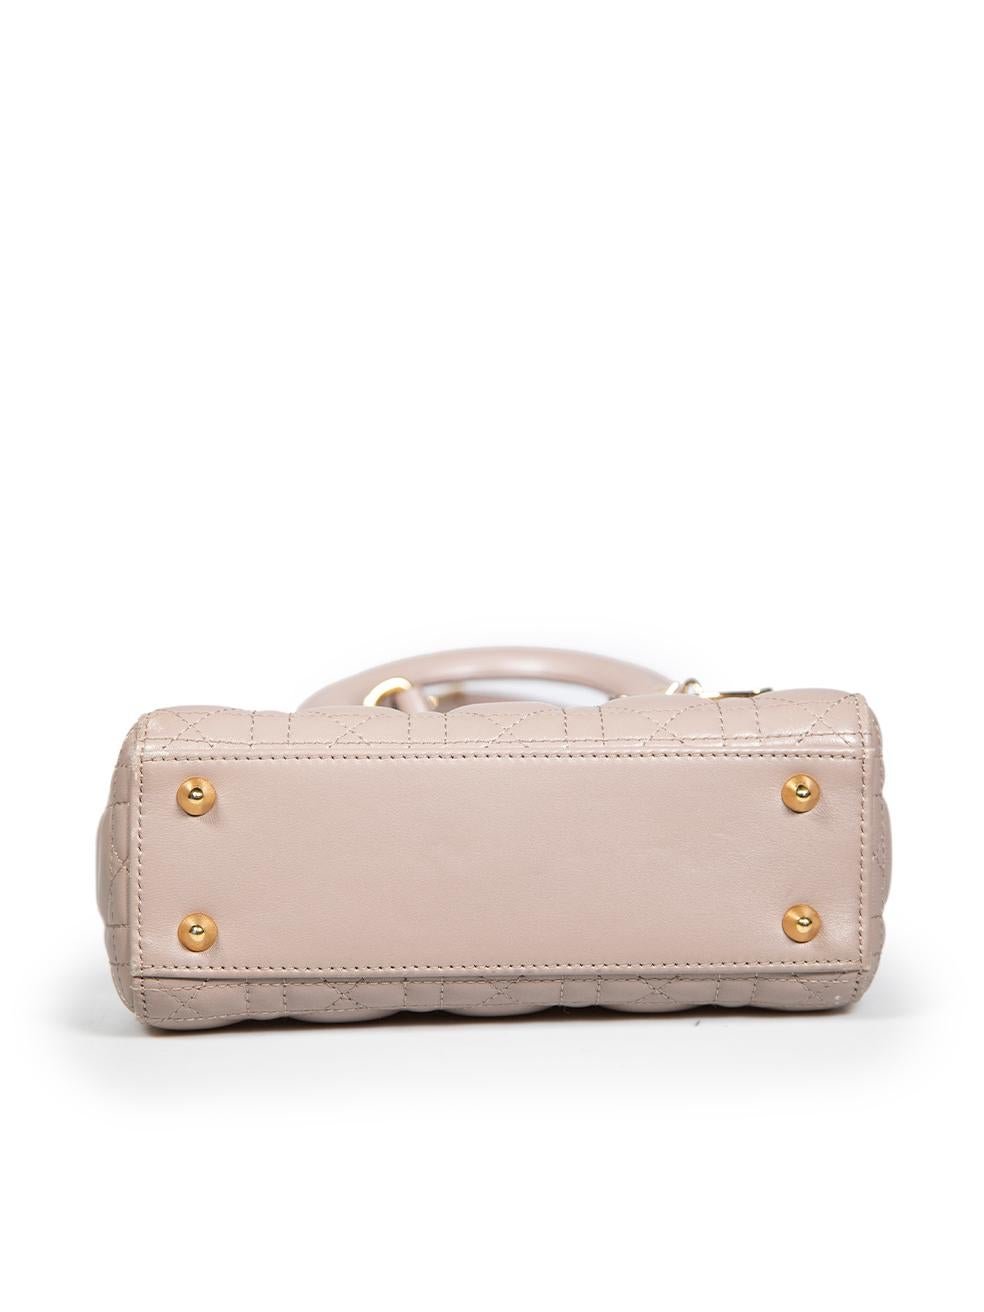 Women's Dior Beige Leather Small Lady Dior Bag